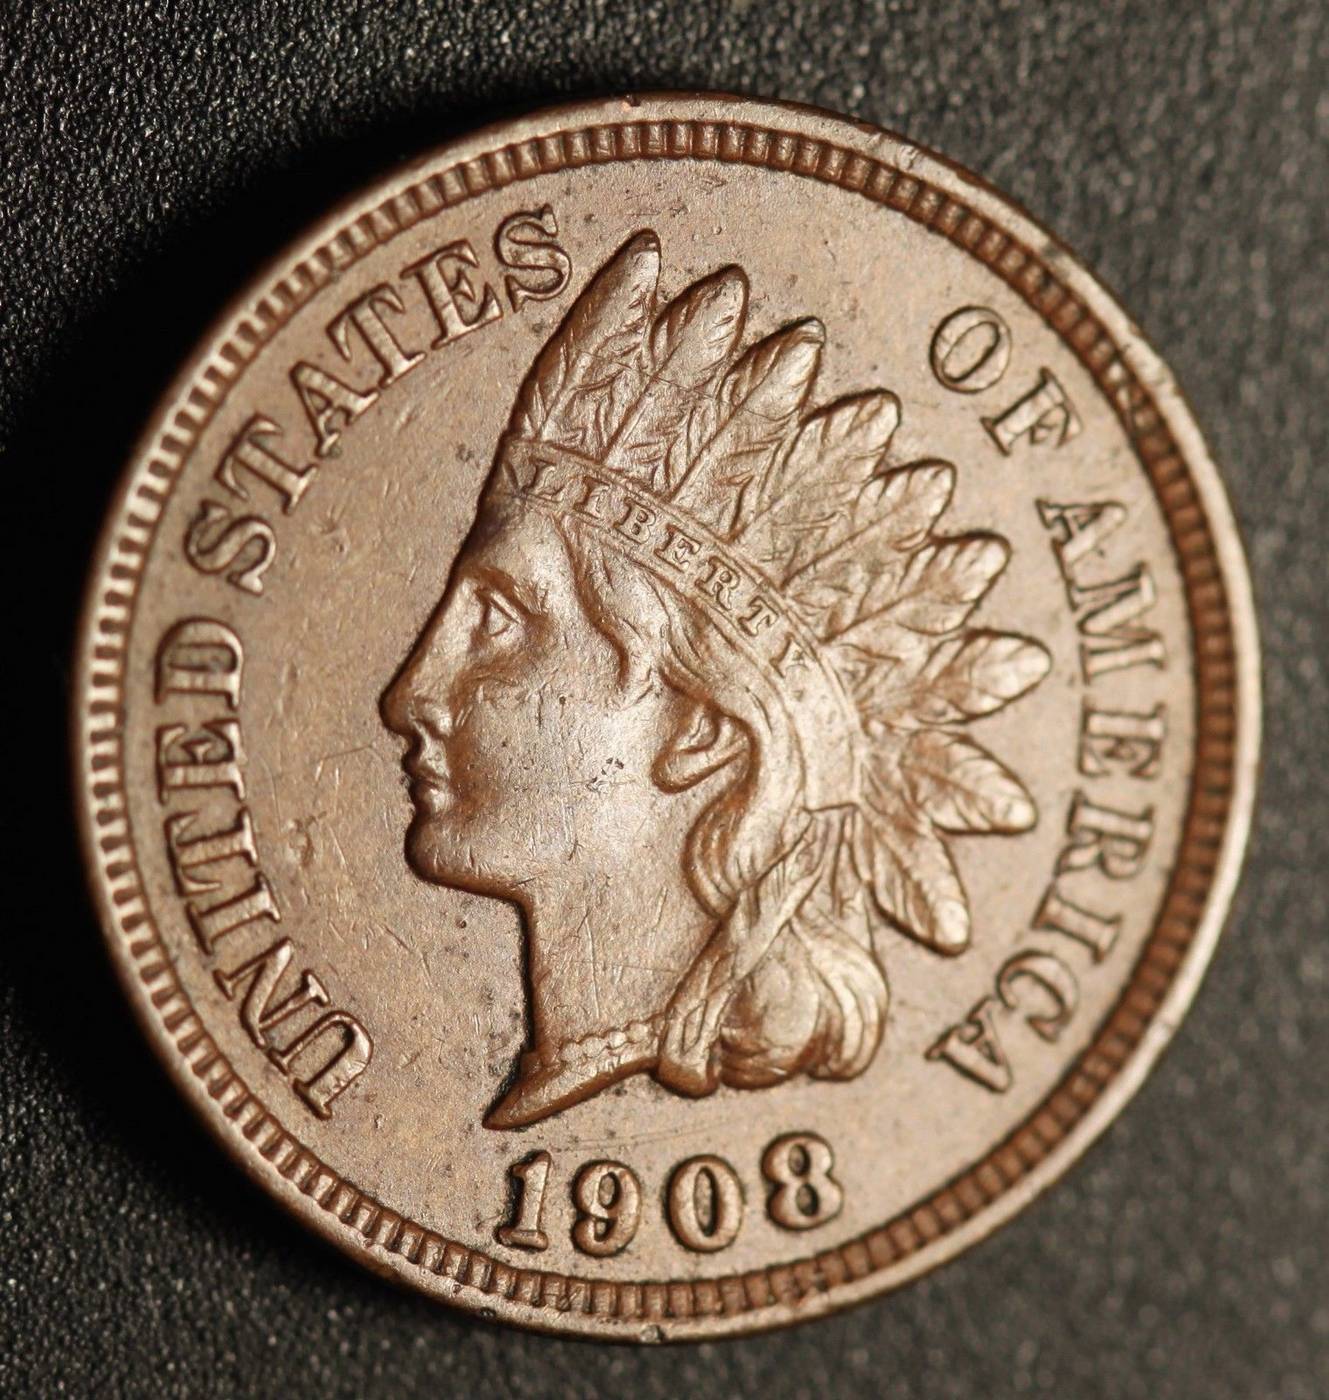 1908 RPD-017 - Indian Head Penny - Photo by Ed Nathanson